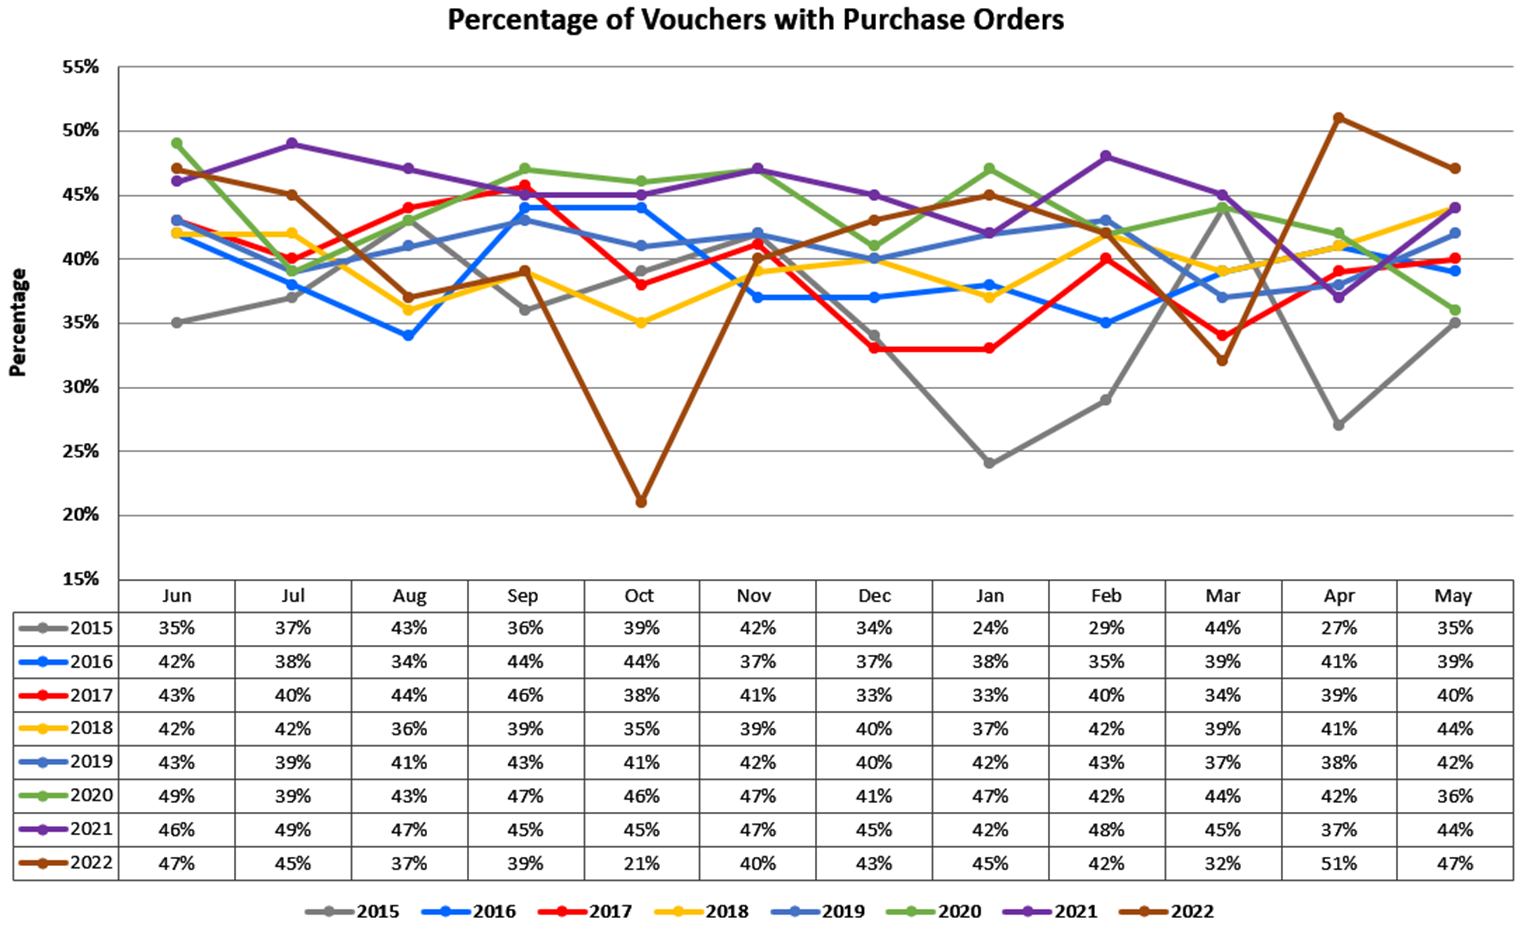 Percentage of Vouchers with Purchase Orders